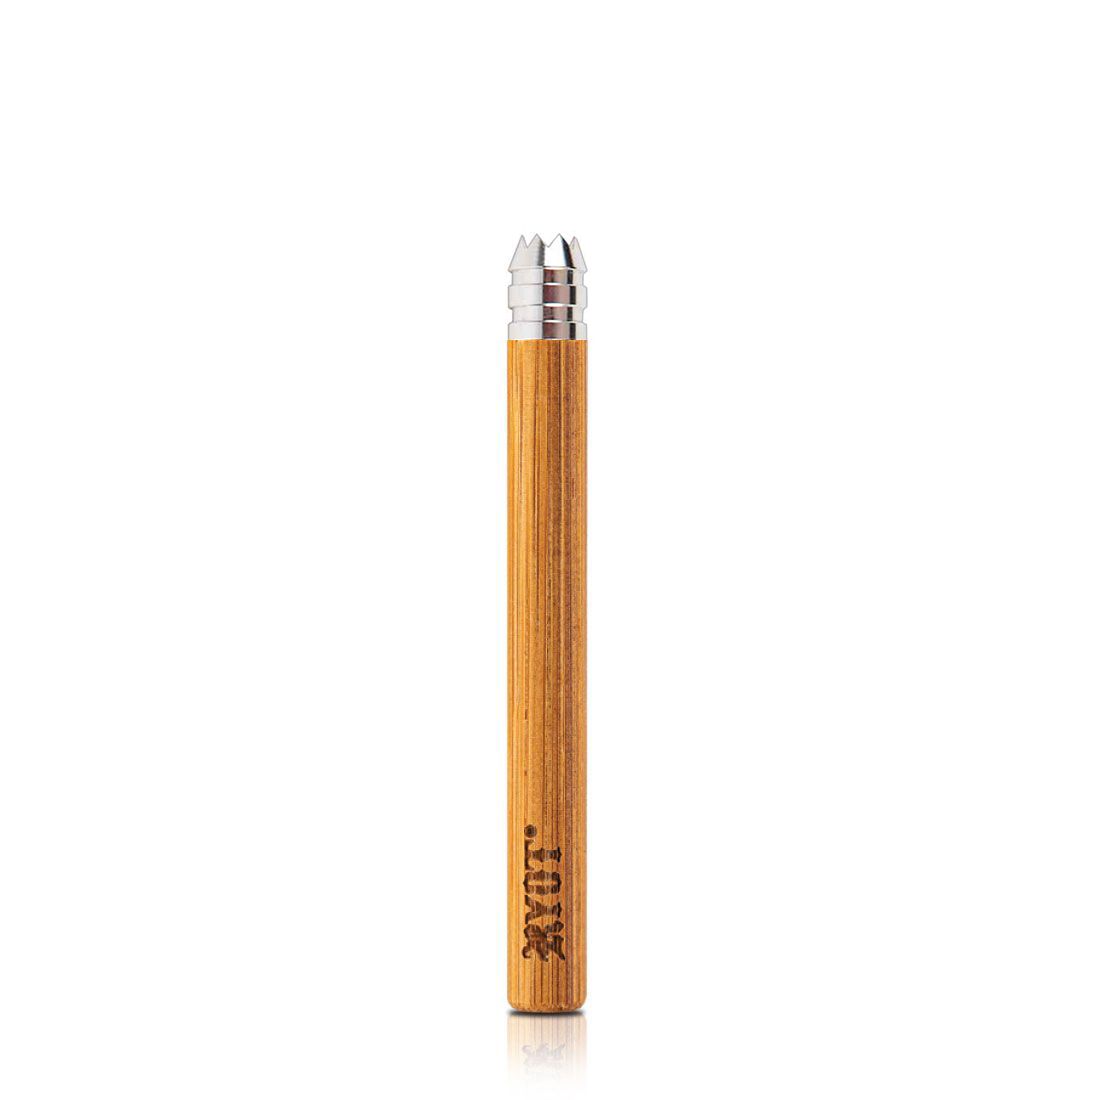 RYOT LARGE (3") WOODEN TASTER WITH DIGGER TIP IN MAPLE TUBED